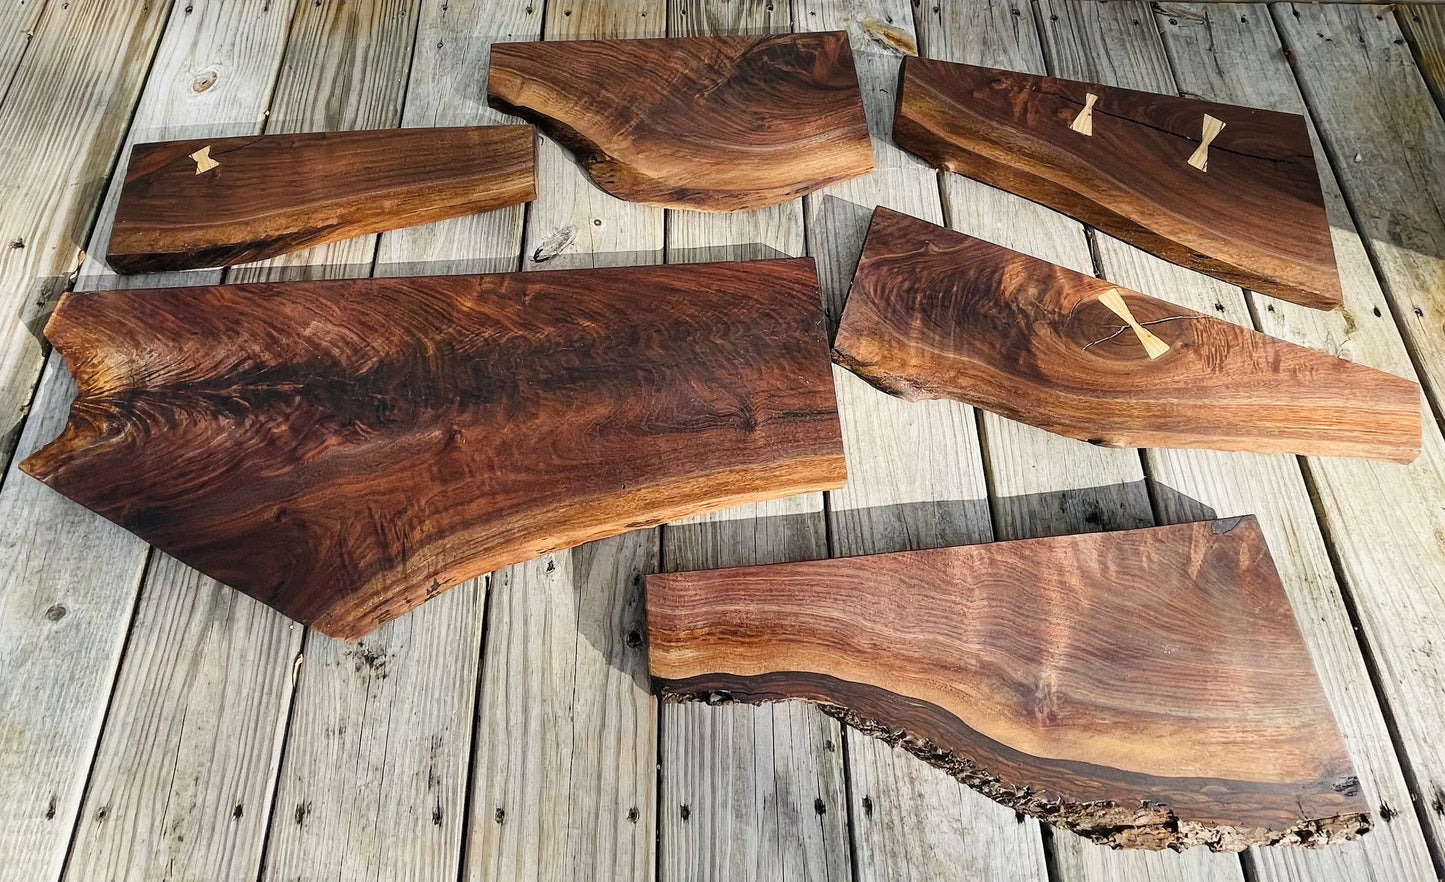 Black walnut live edge charcuterie boards, some featuring wood bow tie inlays. 